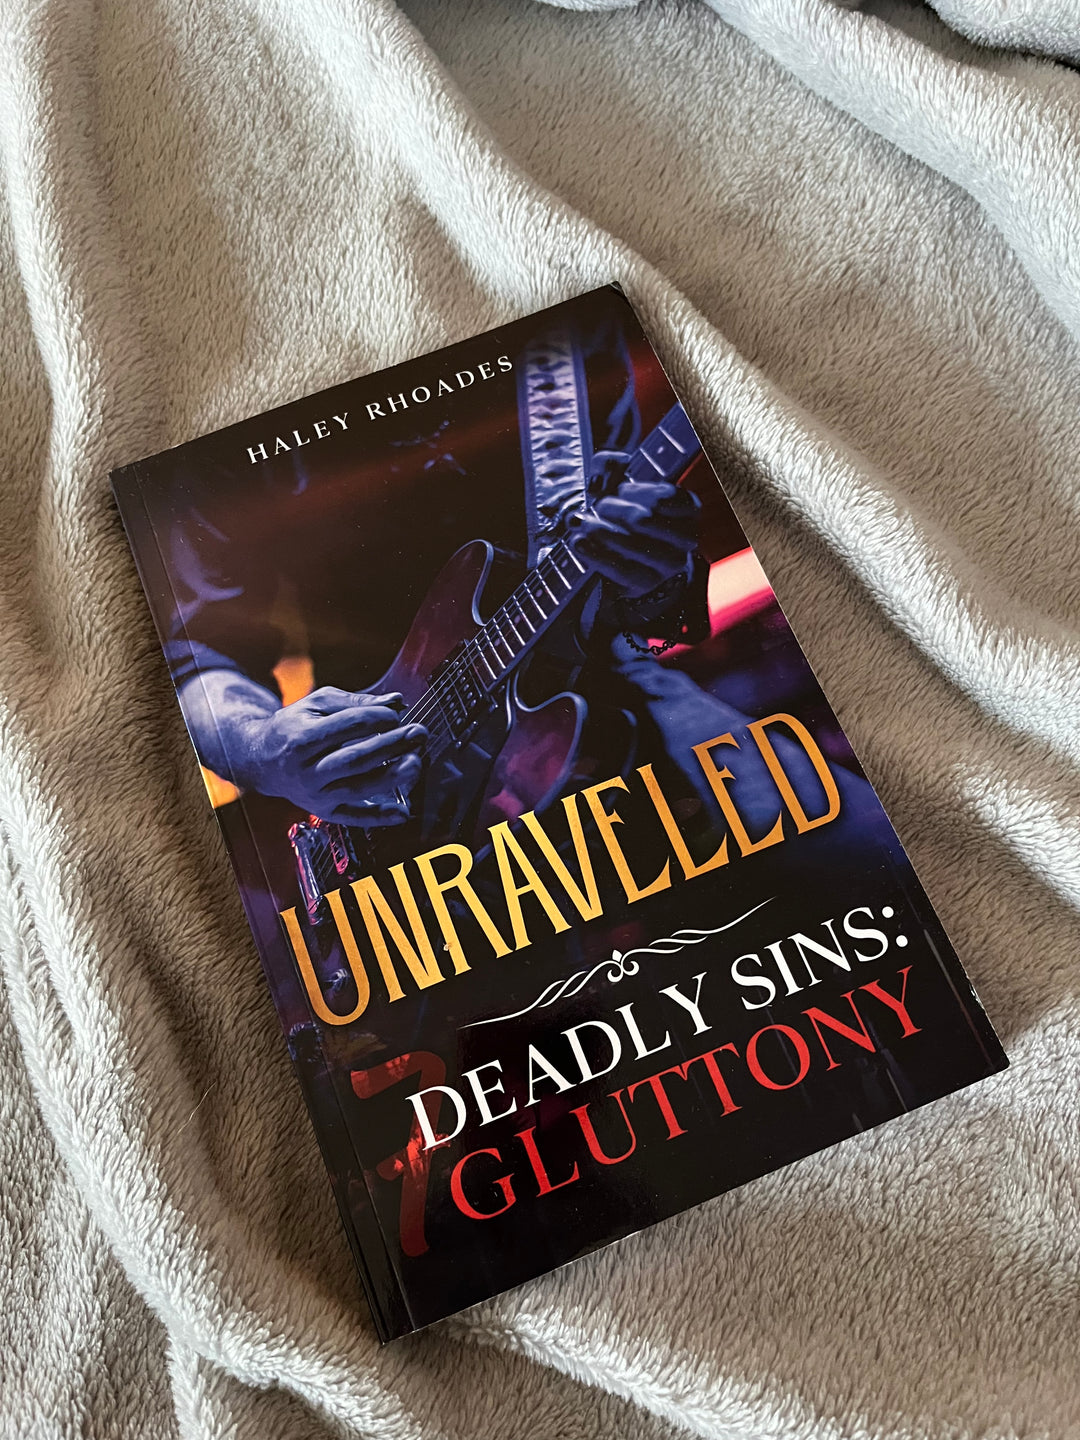 Unraveled, 7 Deadly Sins: Gluttony